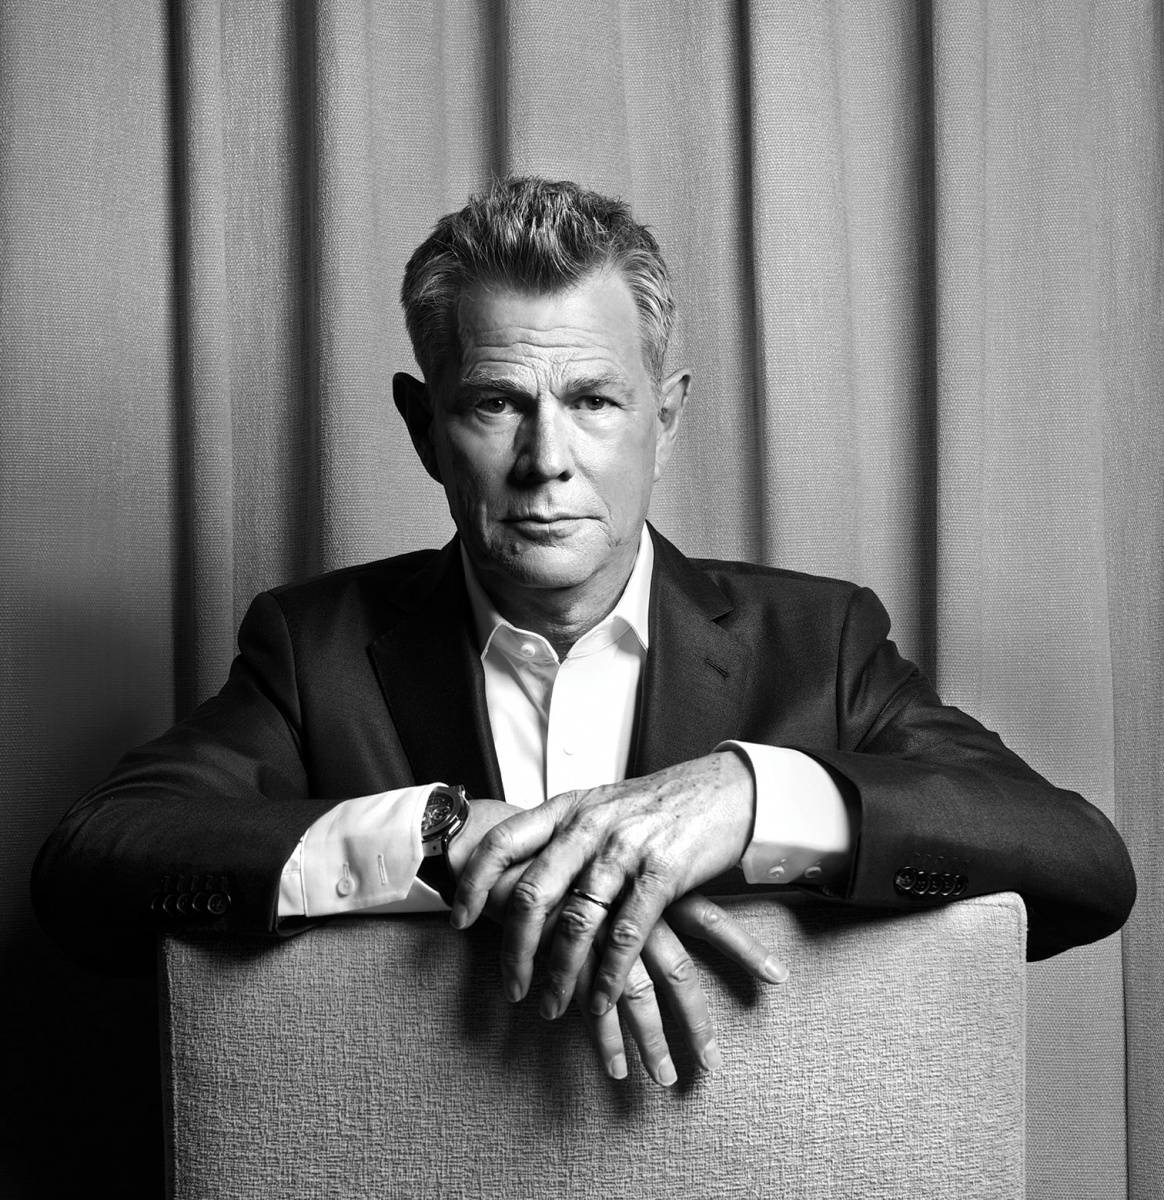 Grammys, Platinum Records, 'Thriller,'David Foster Reflects On His Career